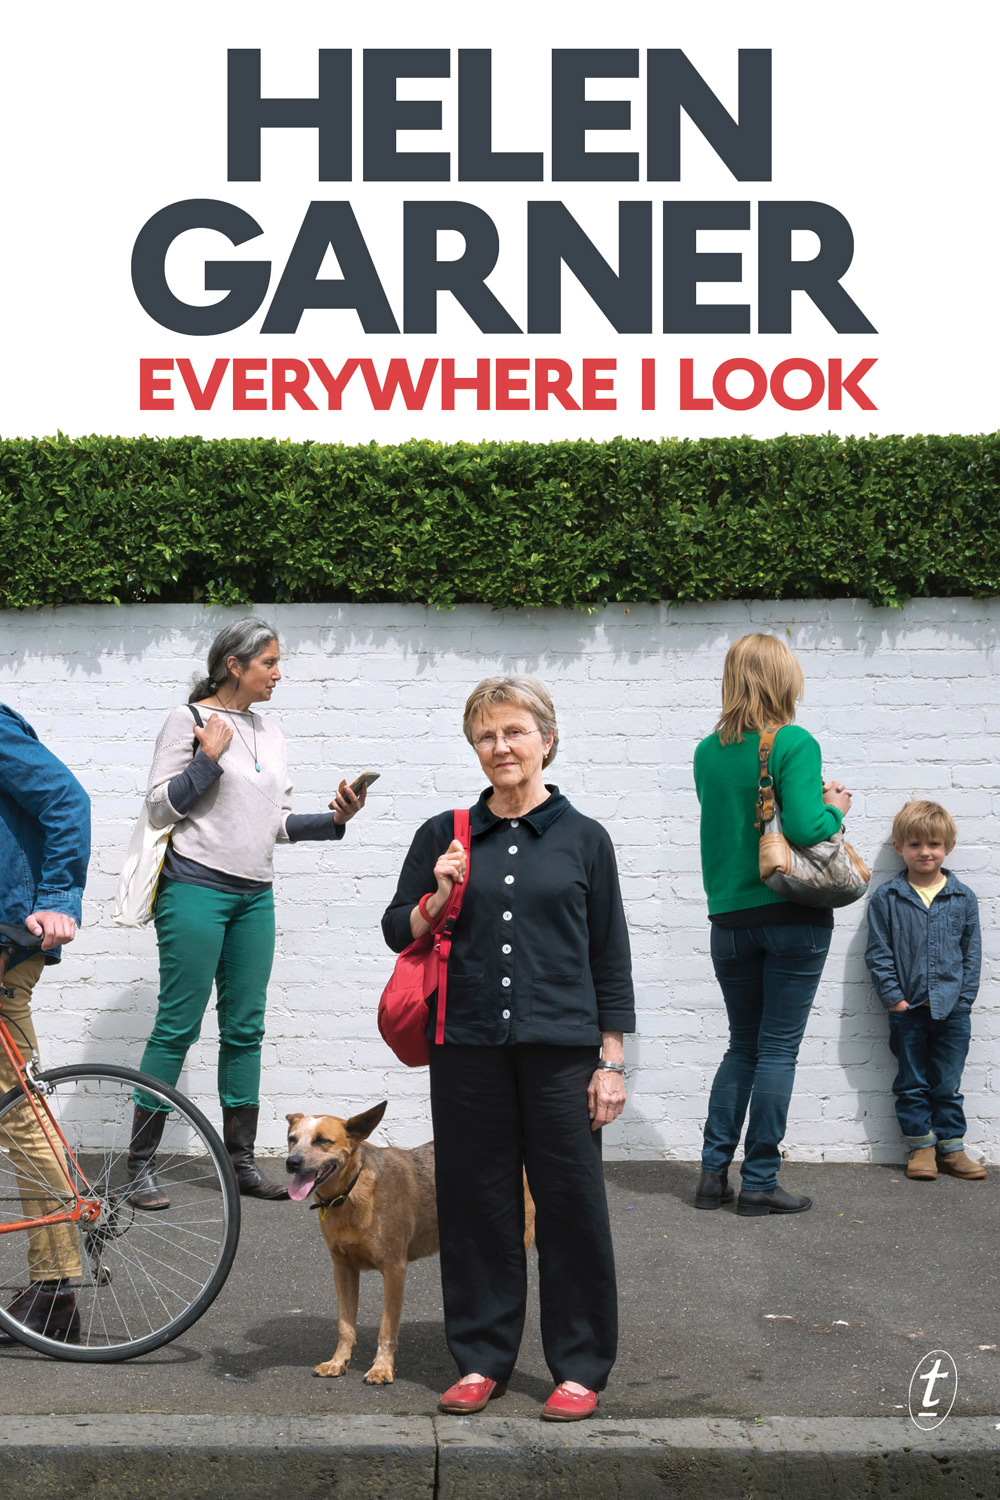 Everywhere I Look, by Helen Garner, is published by Text Publishing, $29.99.